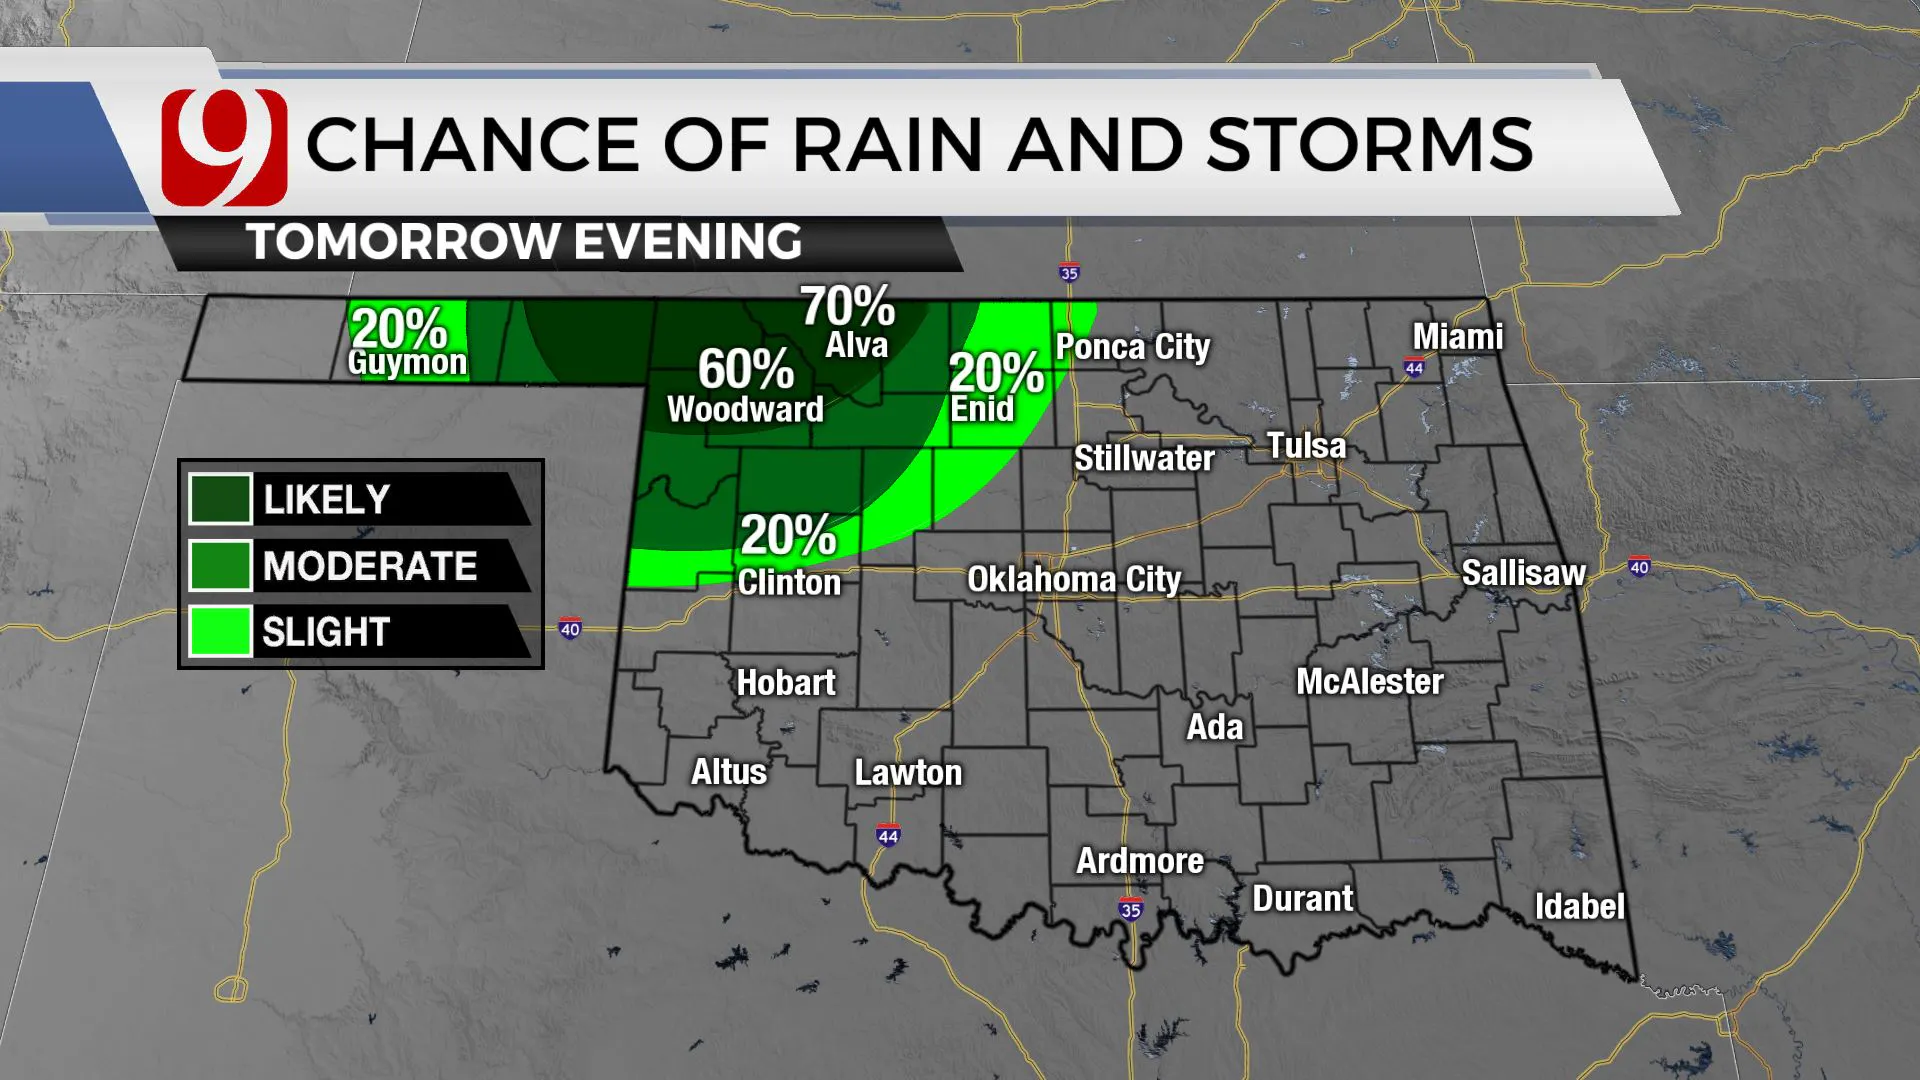 Chances of rain and storms tomorrow evening.